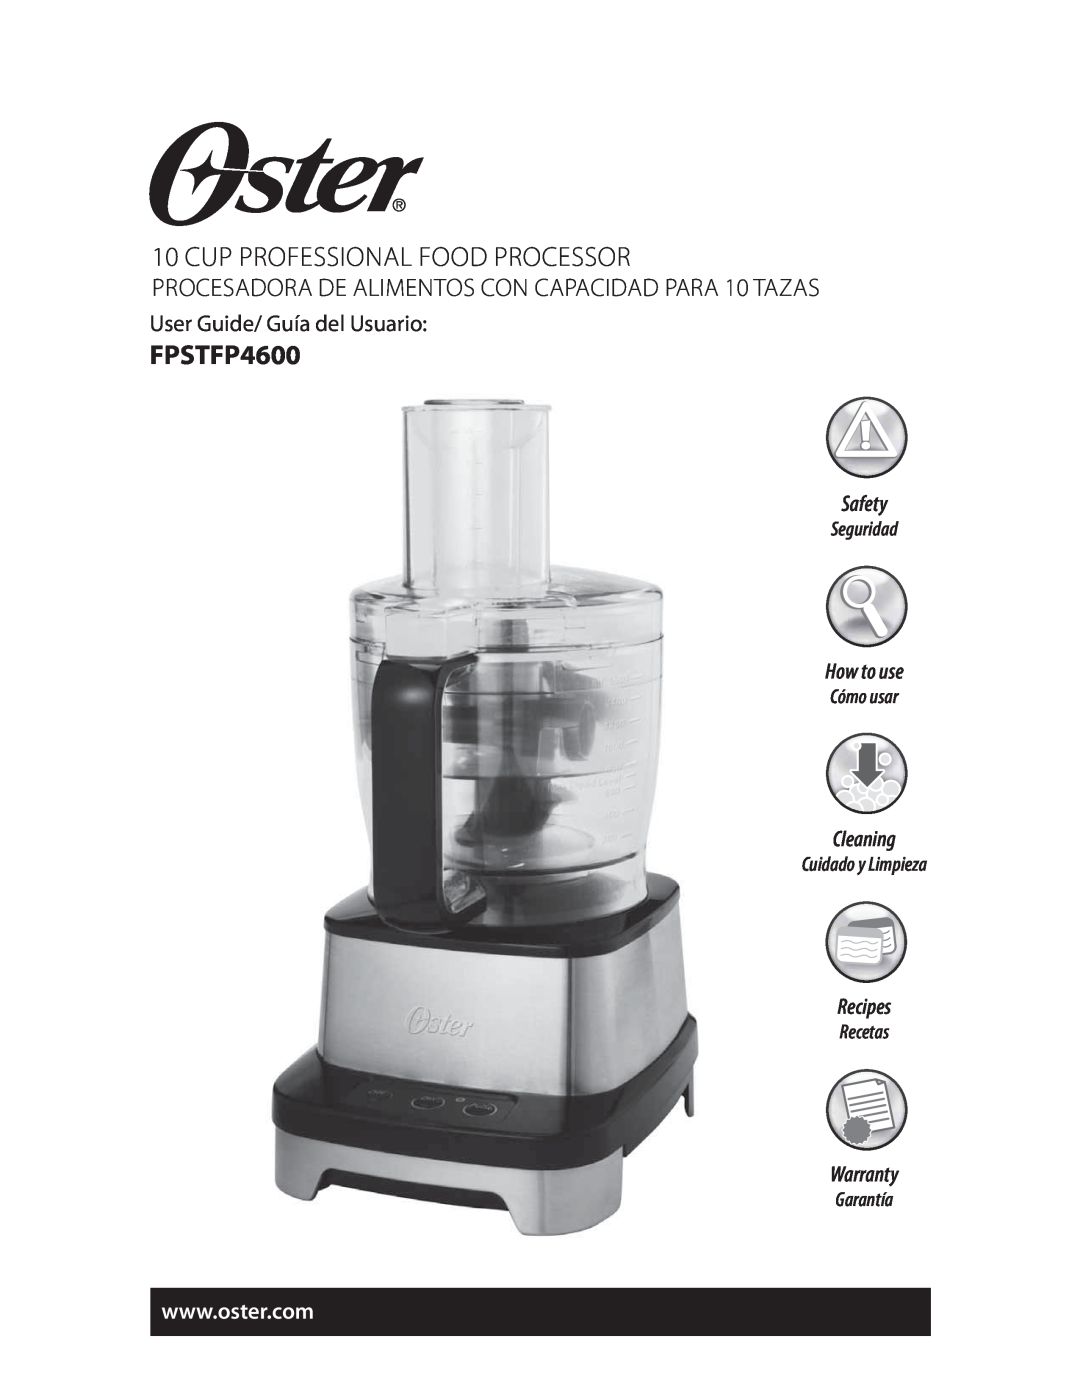 Oster SPR-121409 warranty FPSTFP4600, Cup Professional Food Processor, Safety, How to use, Cleaning, Recipes, Warranty 